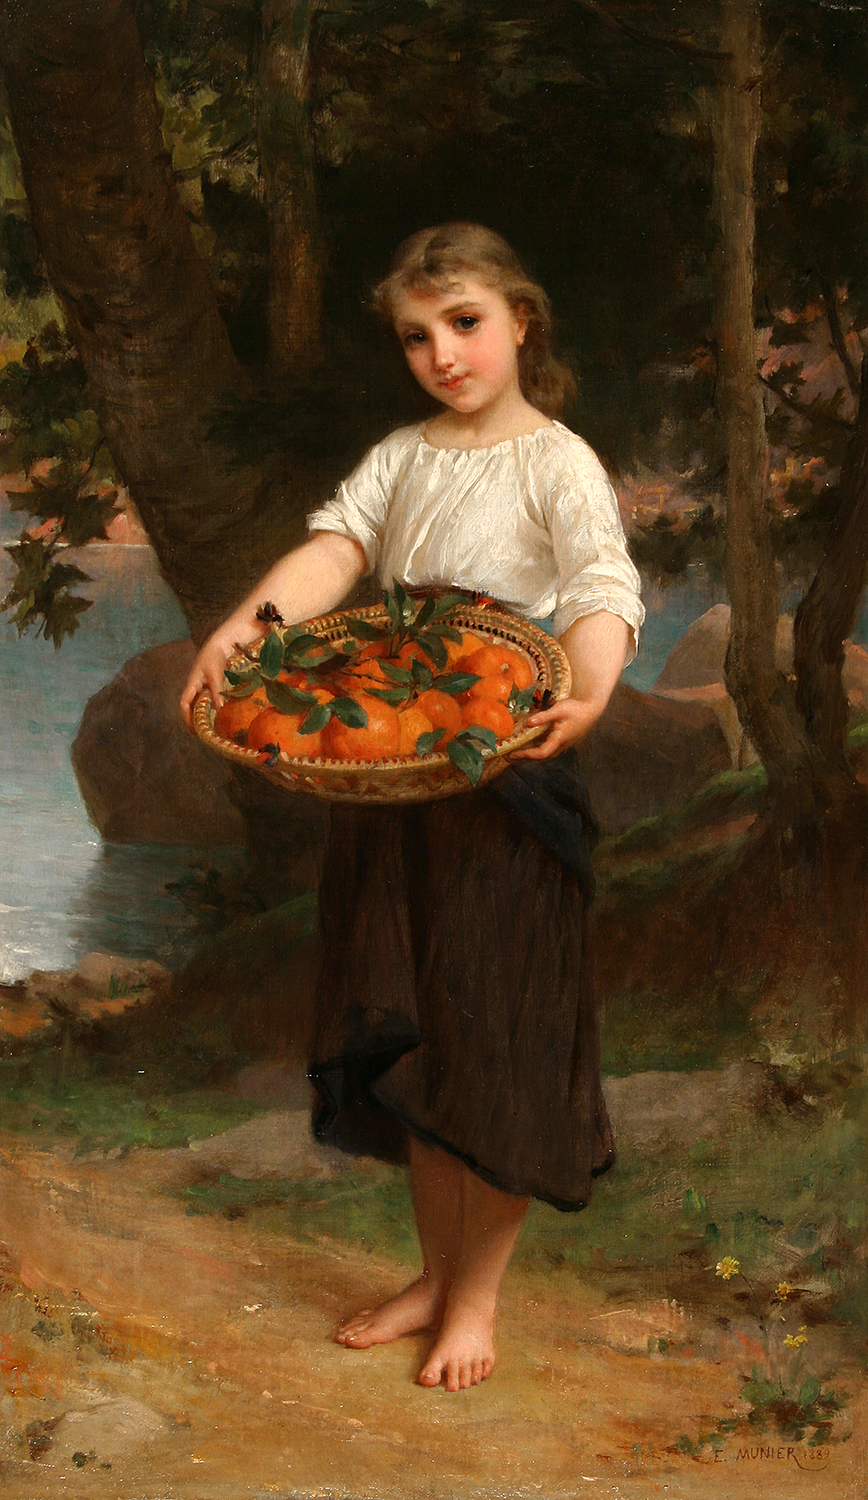 Girl with Basket of Oranges painting